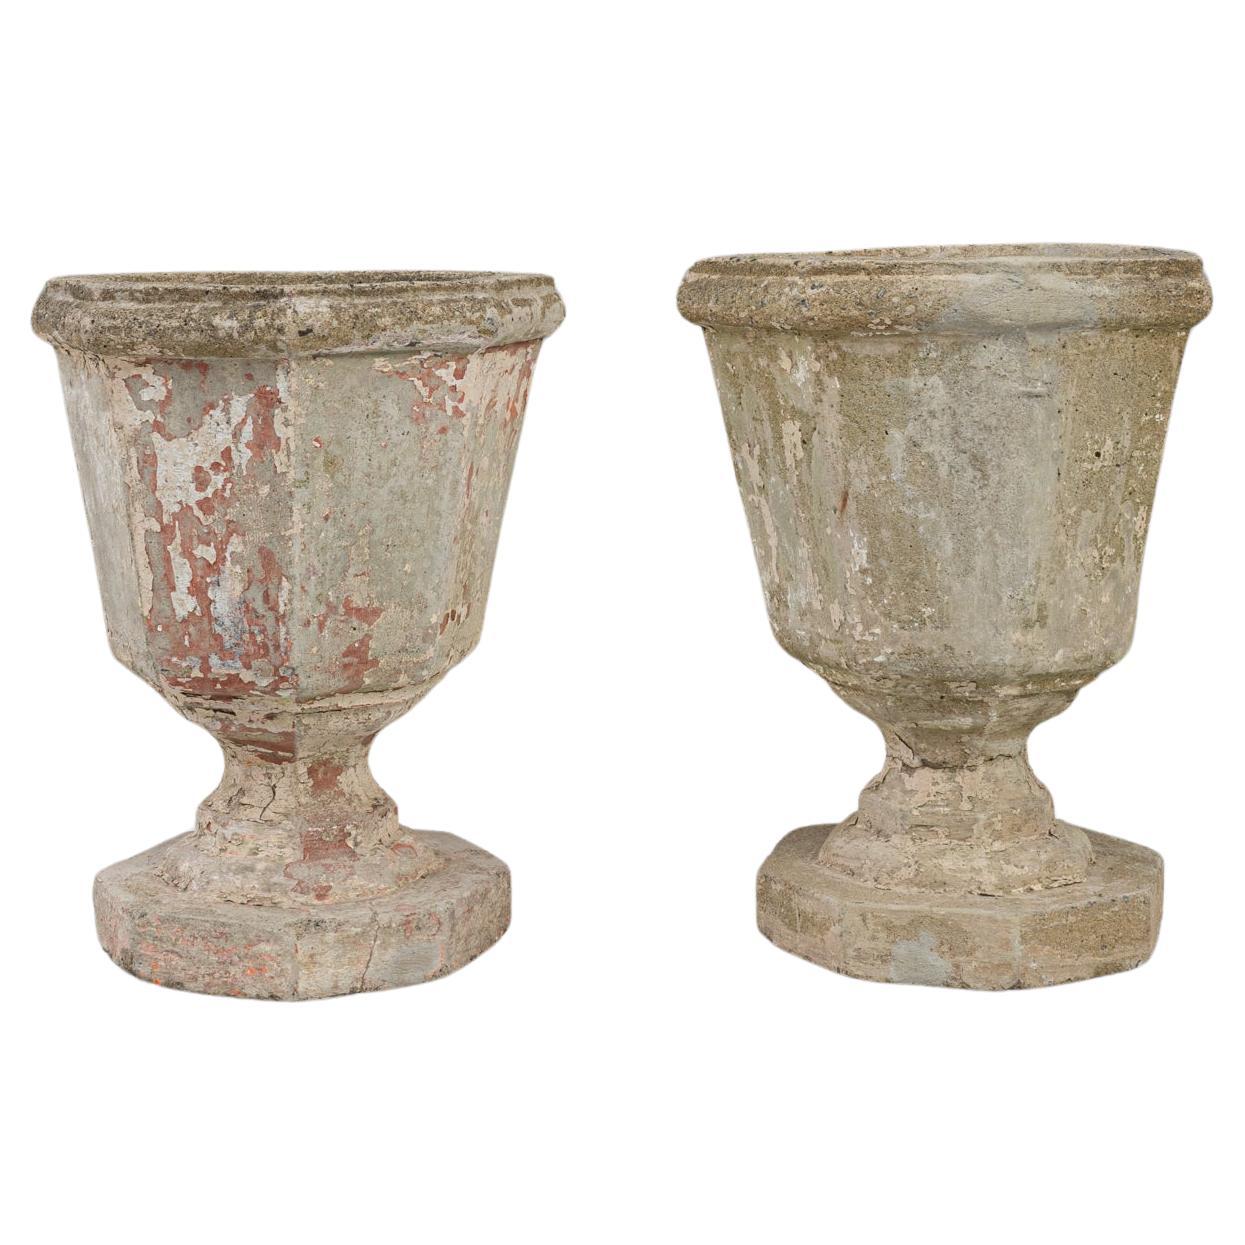 20th Century French Concrete Planters, a Pair For Sale